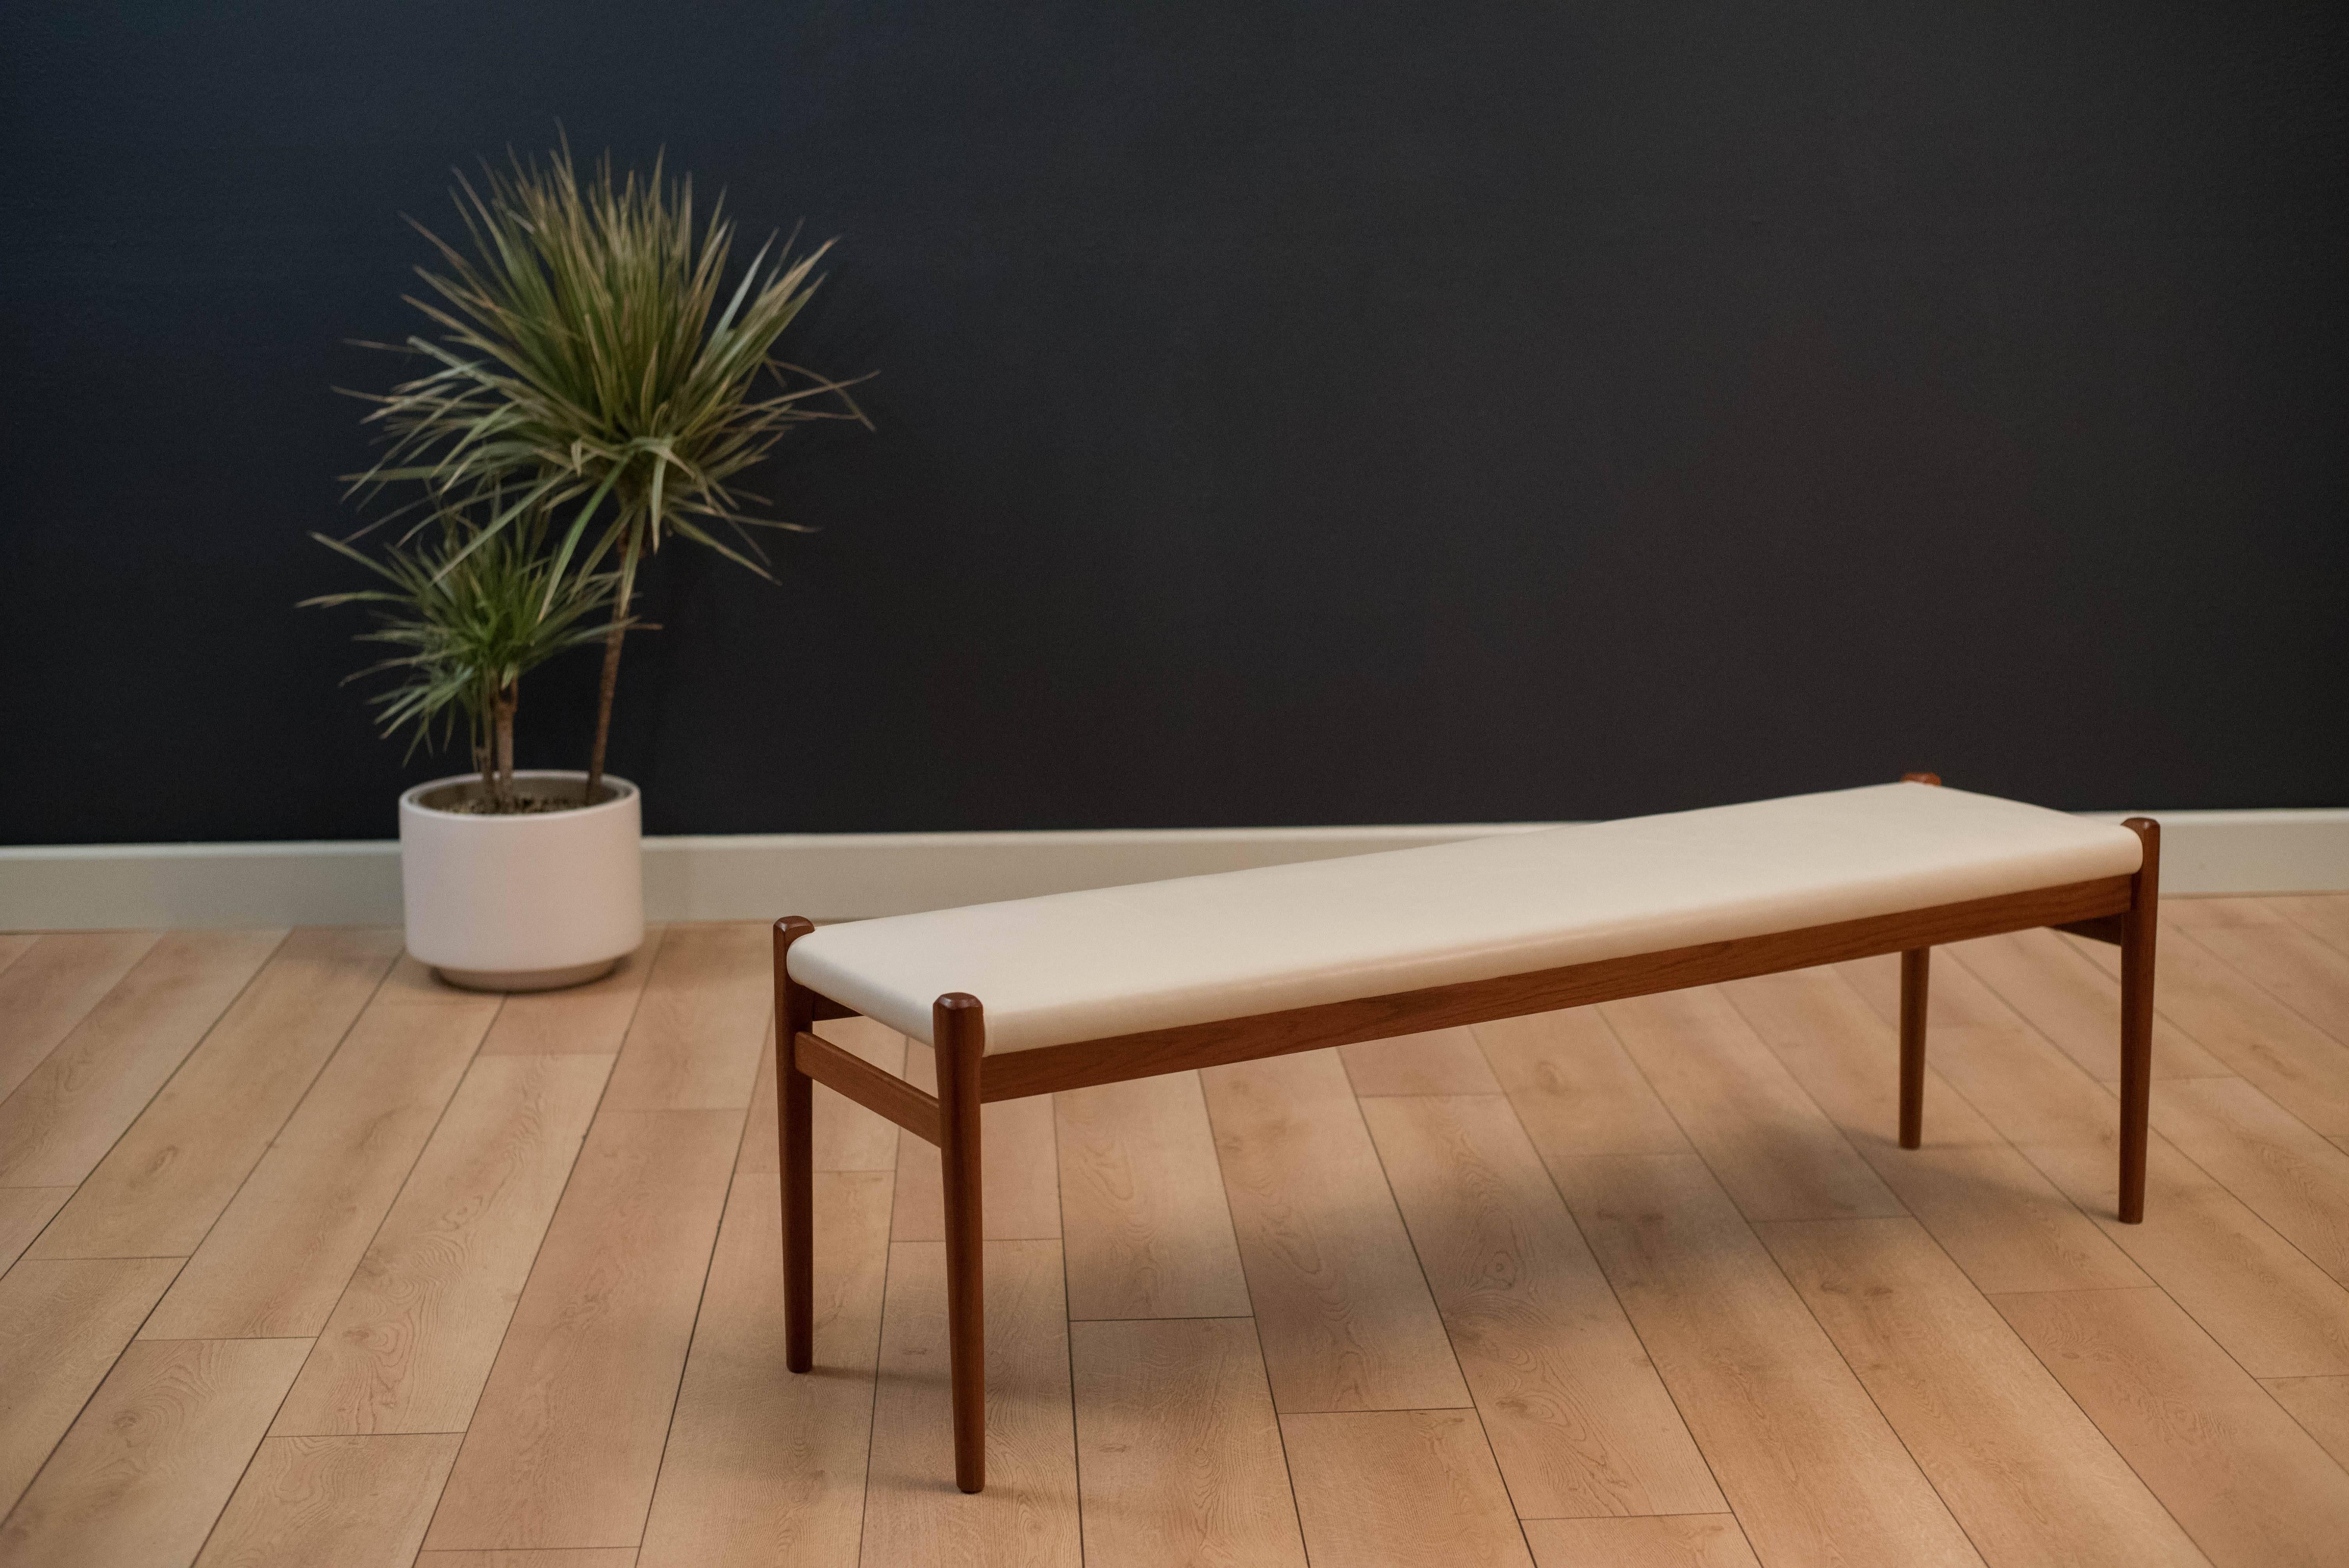 Vintage Danish bench in teak by Niels Moller for J.L. Mobelfabrik, Denmark. This piece has been newly reupholstered in white leather and functions as dining seating or as a hallway/bedroom bench.